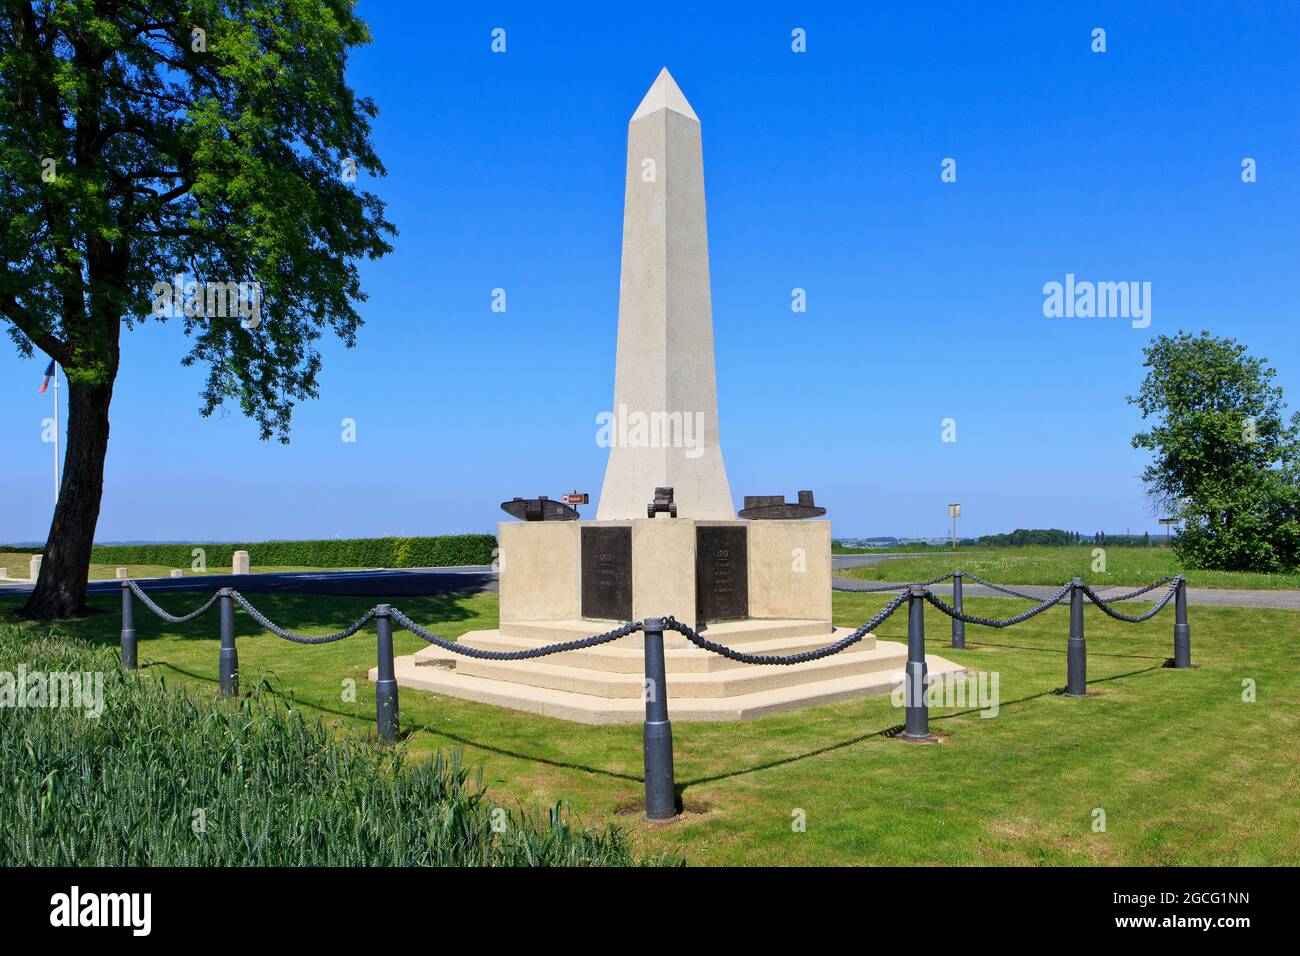 The First World War Tank Corps Memorial commemorating the first ever tank battle on 15 September 1916 in Pozieres (Somme), France Stock Photo